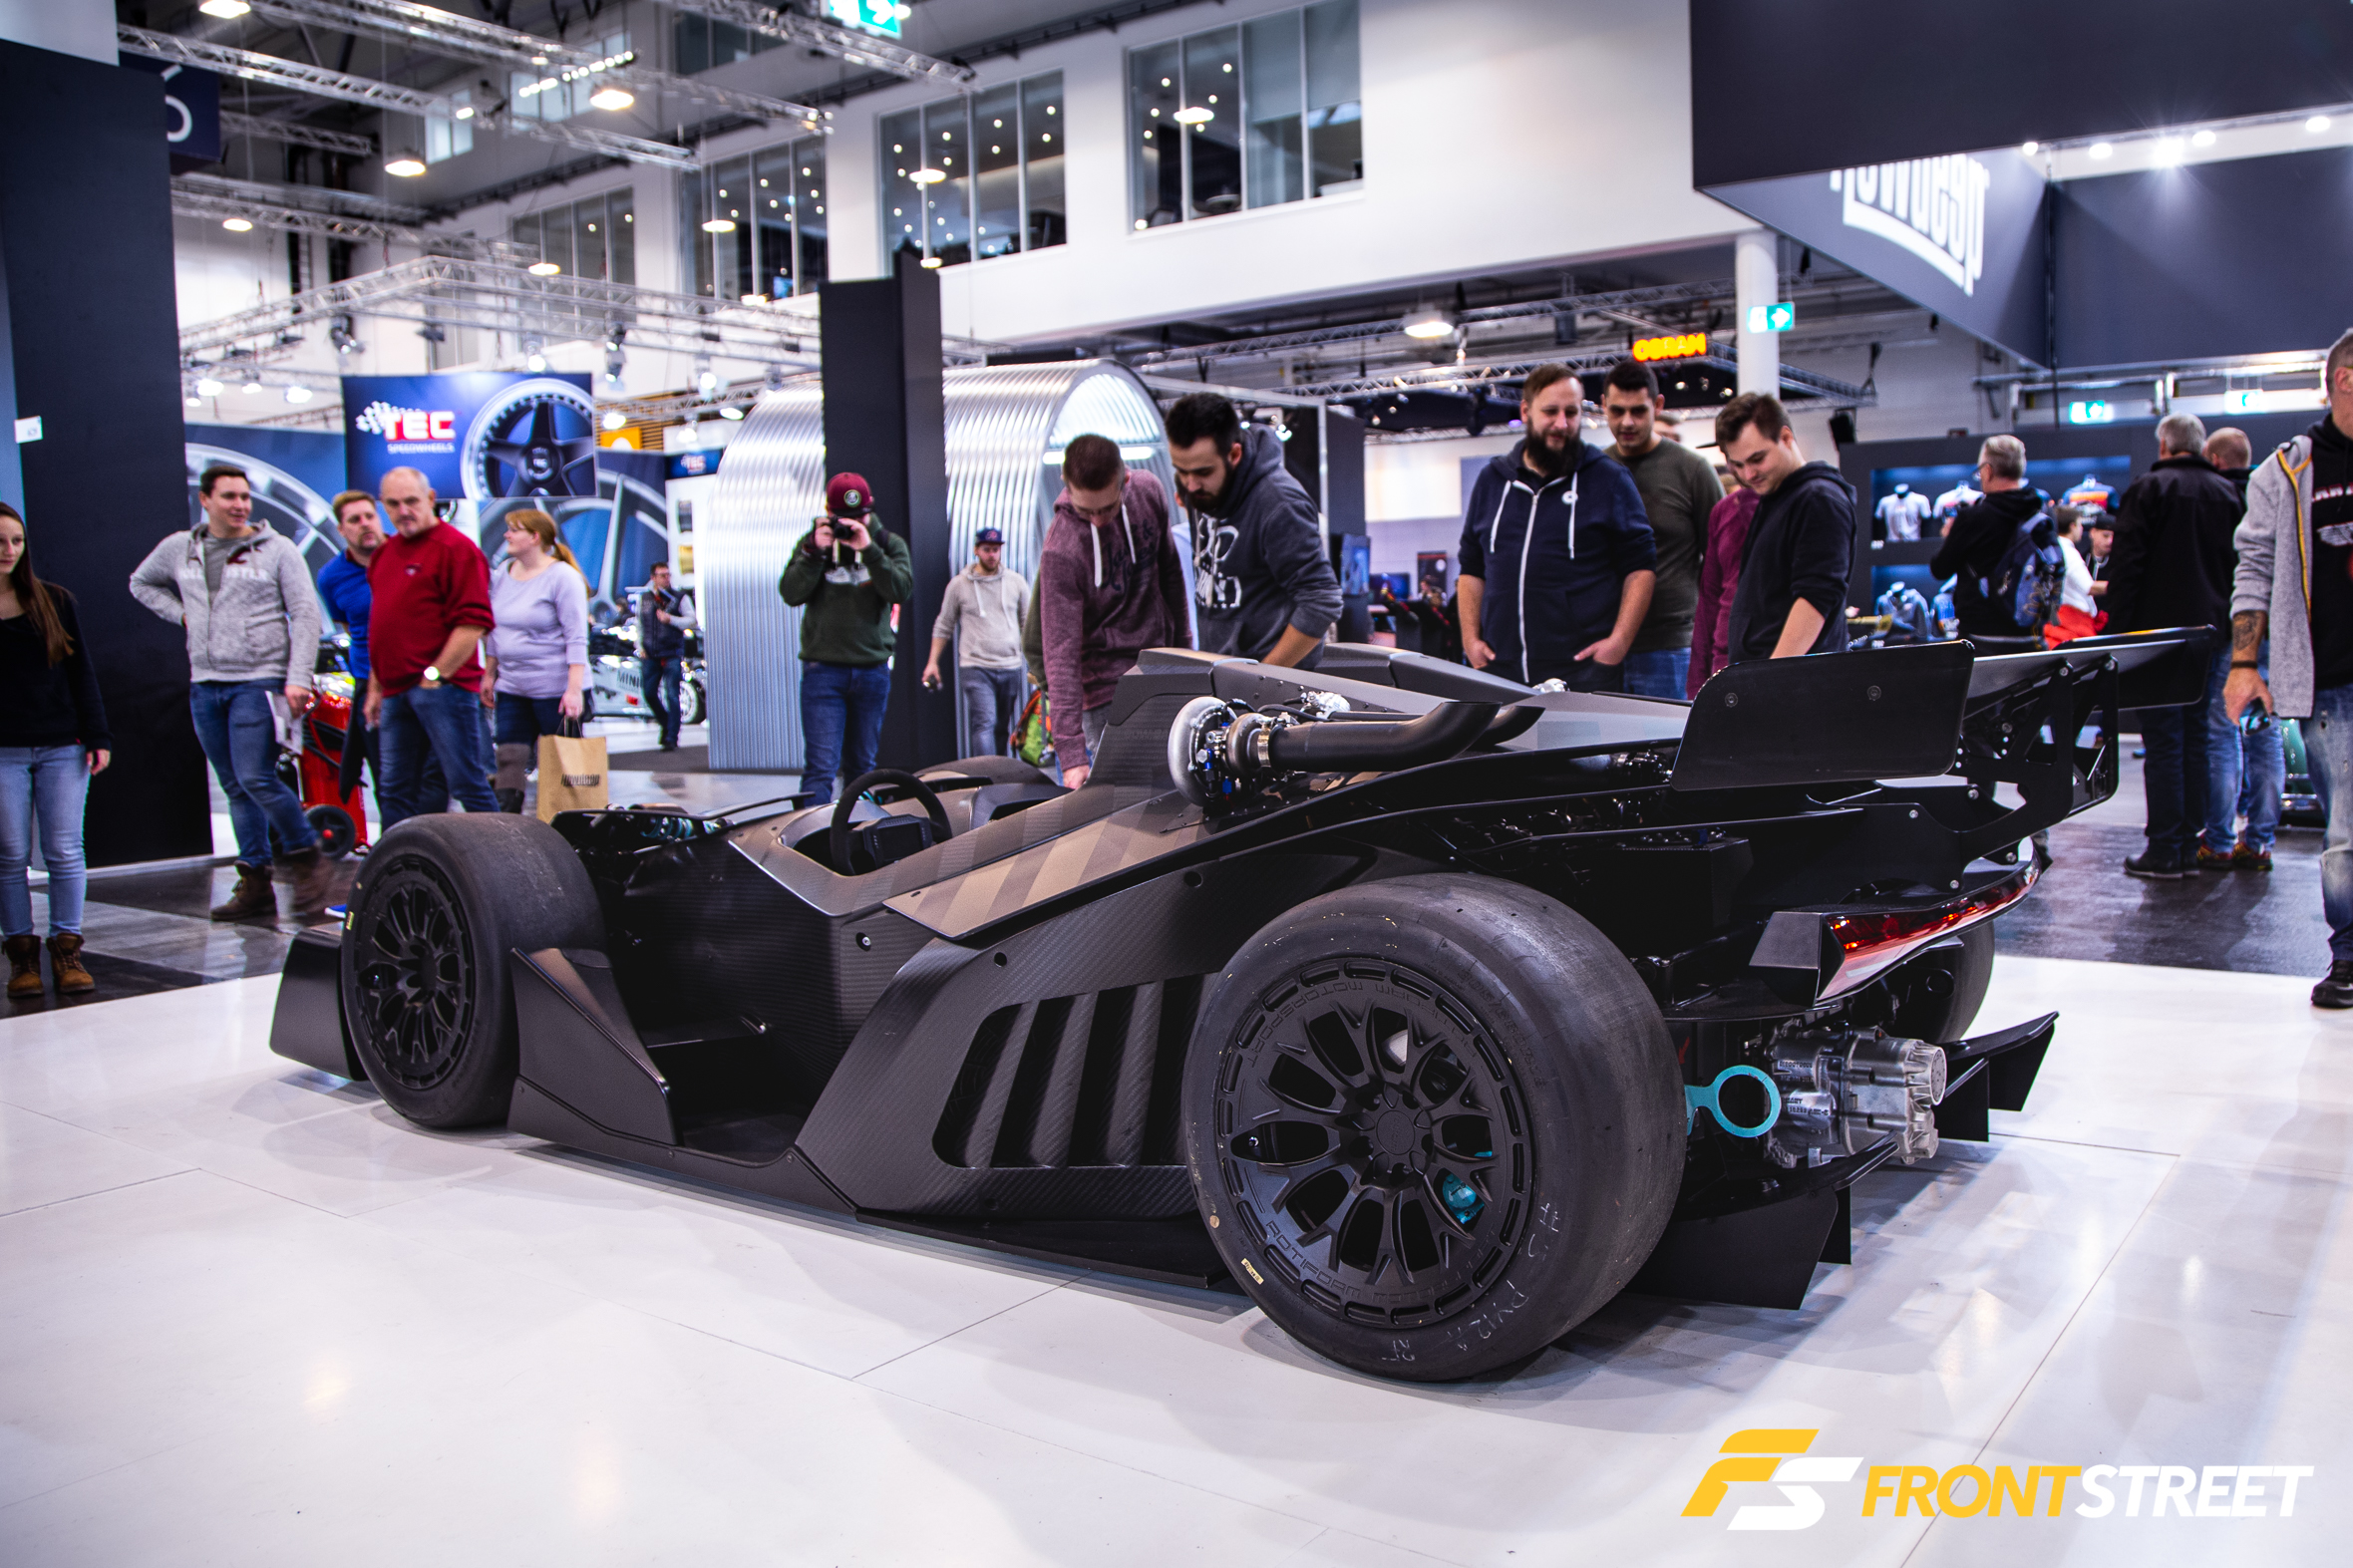 8 Builds From The 2019 Essen Motor Show That Blew Away Expectations